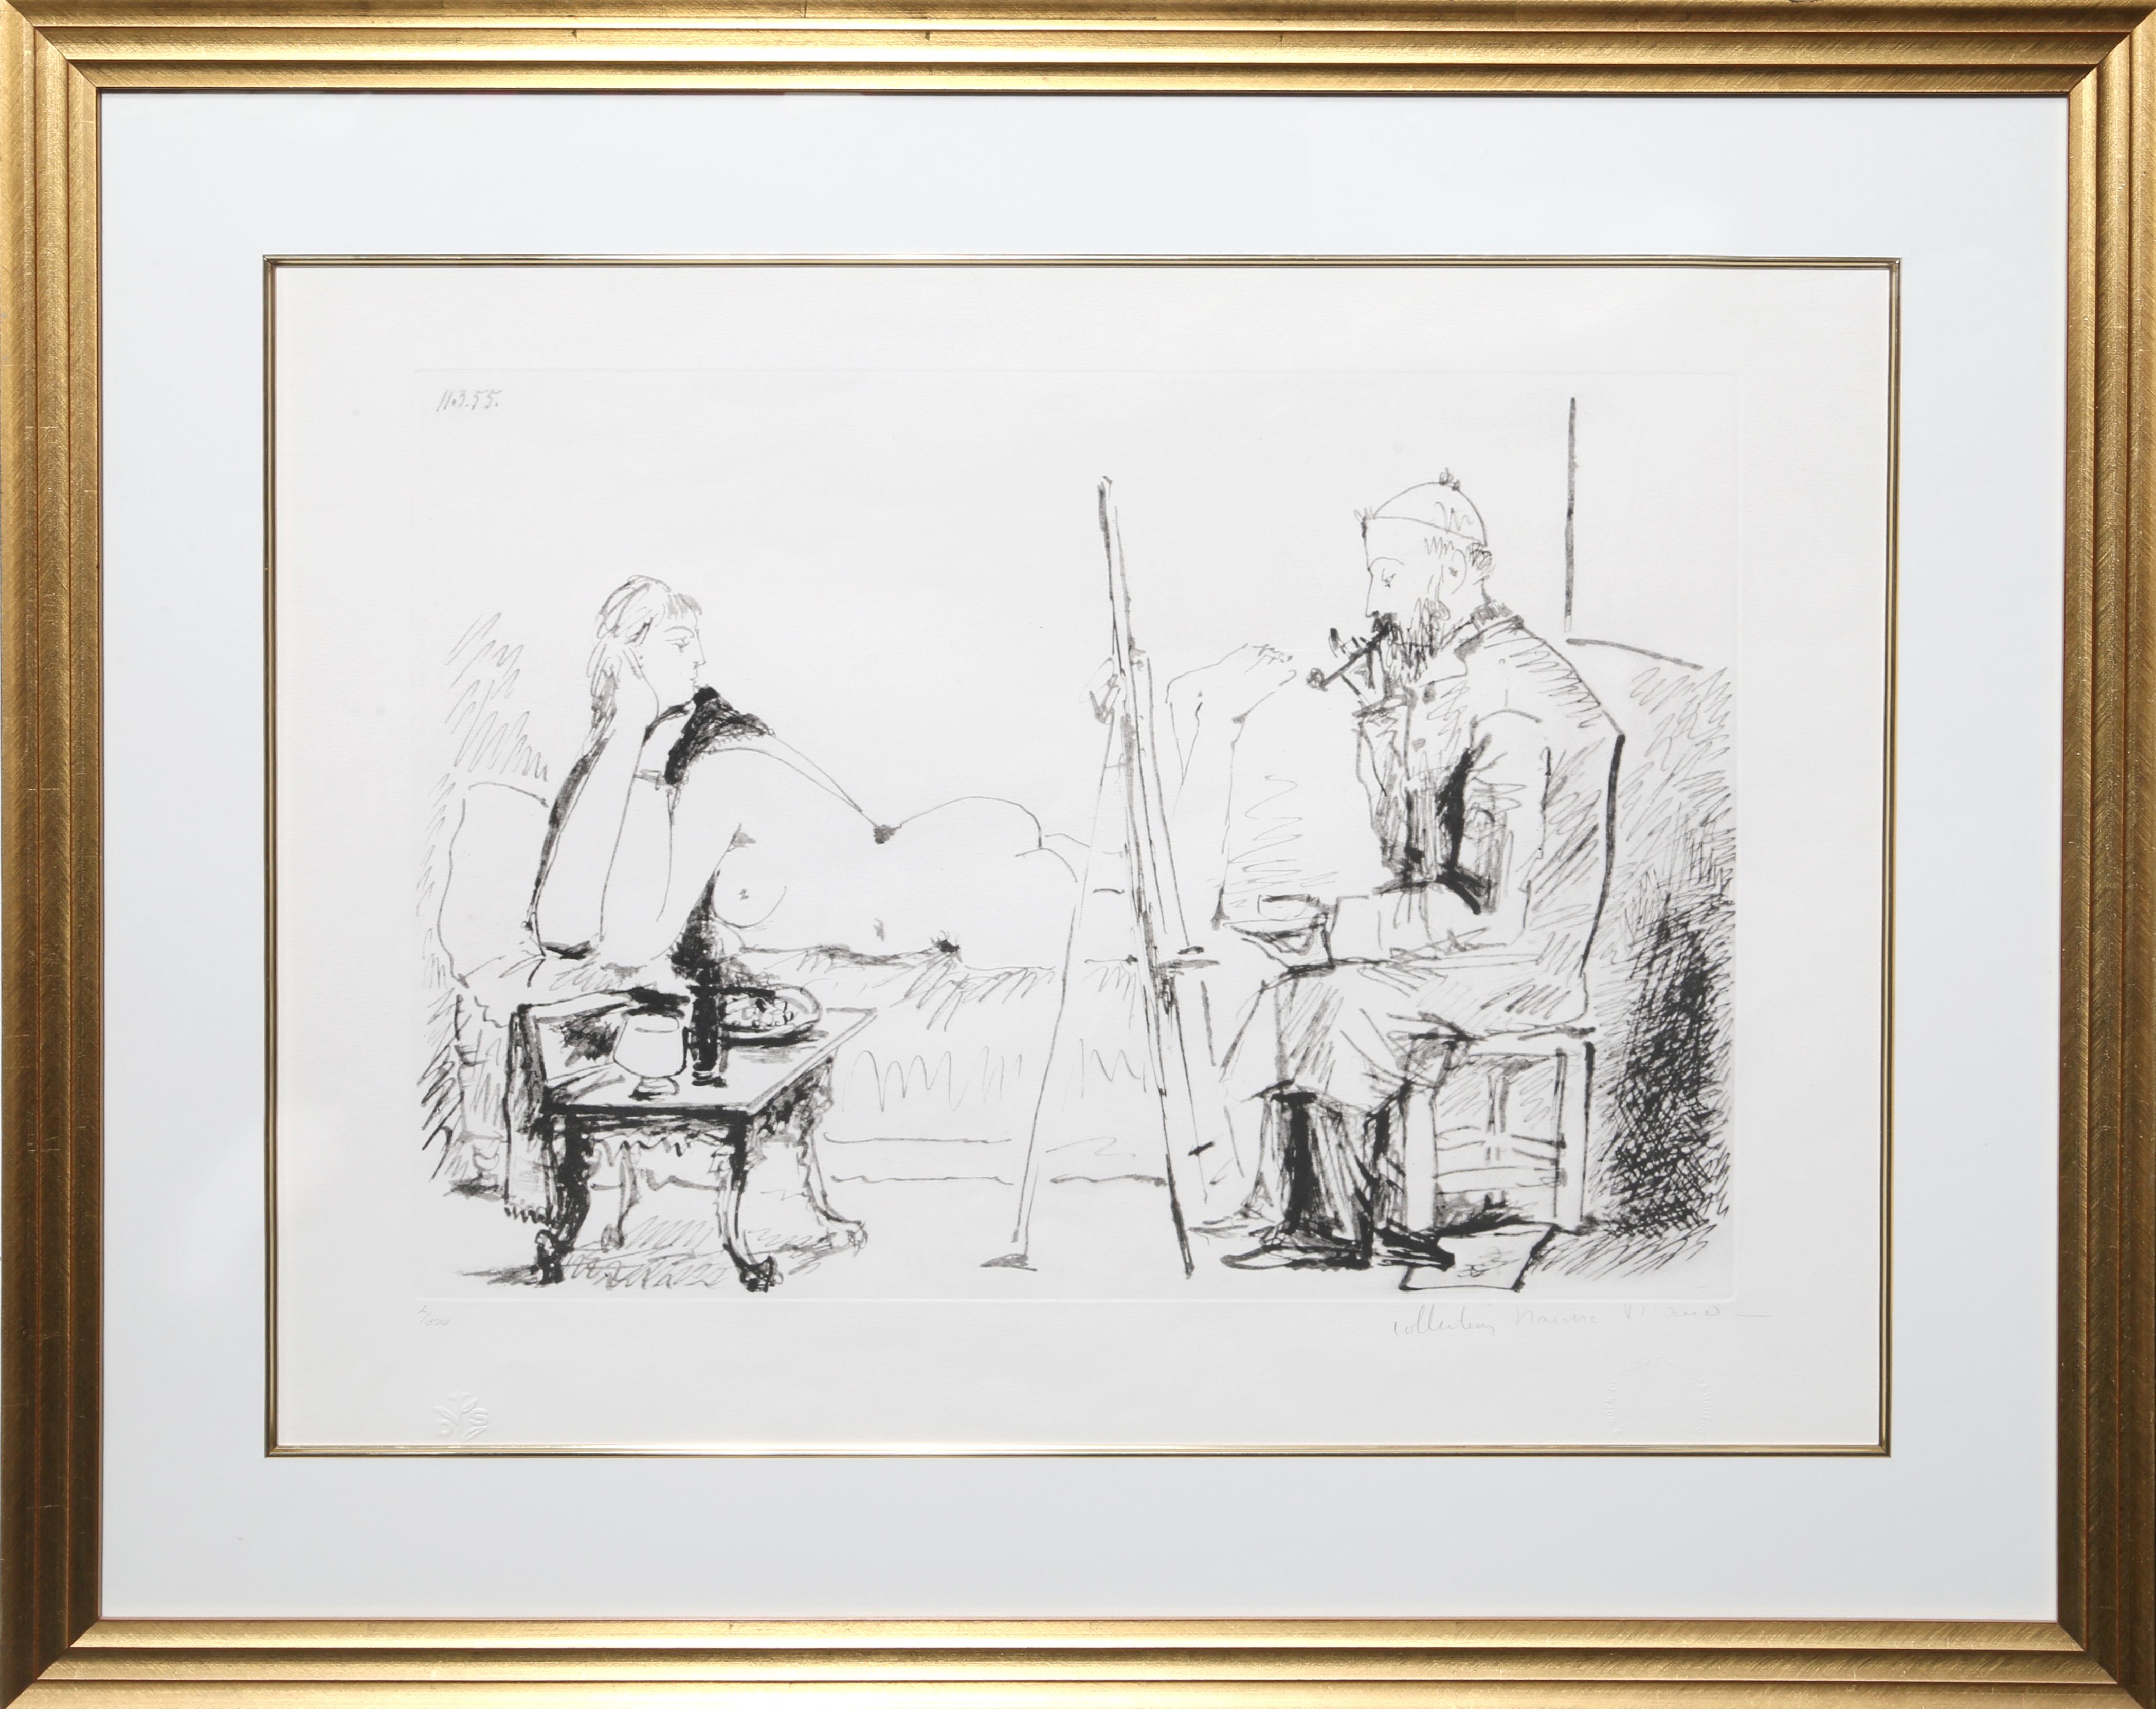 A lithograph from the Marina Picasso Estate Collection after the Pablo Picasso painting "Le Peintre et son Modele". The original painting was completed in 1955. In the 1970's after Picasso's death, Marina Picasso, his granddaughter, authorized the